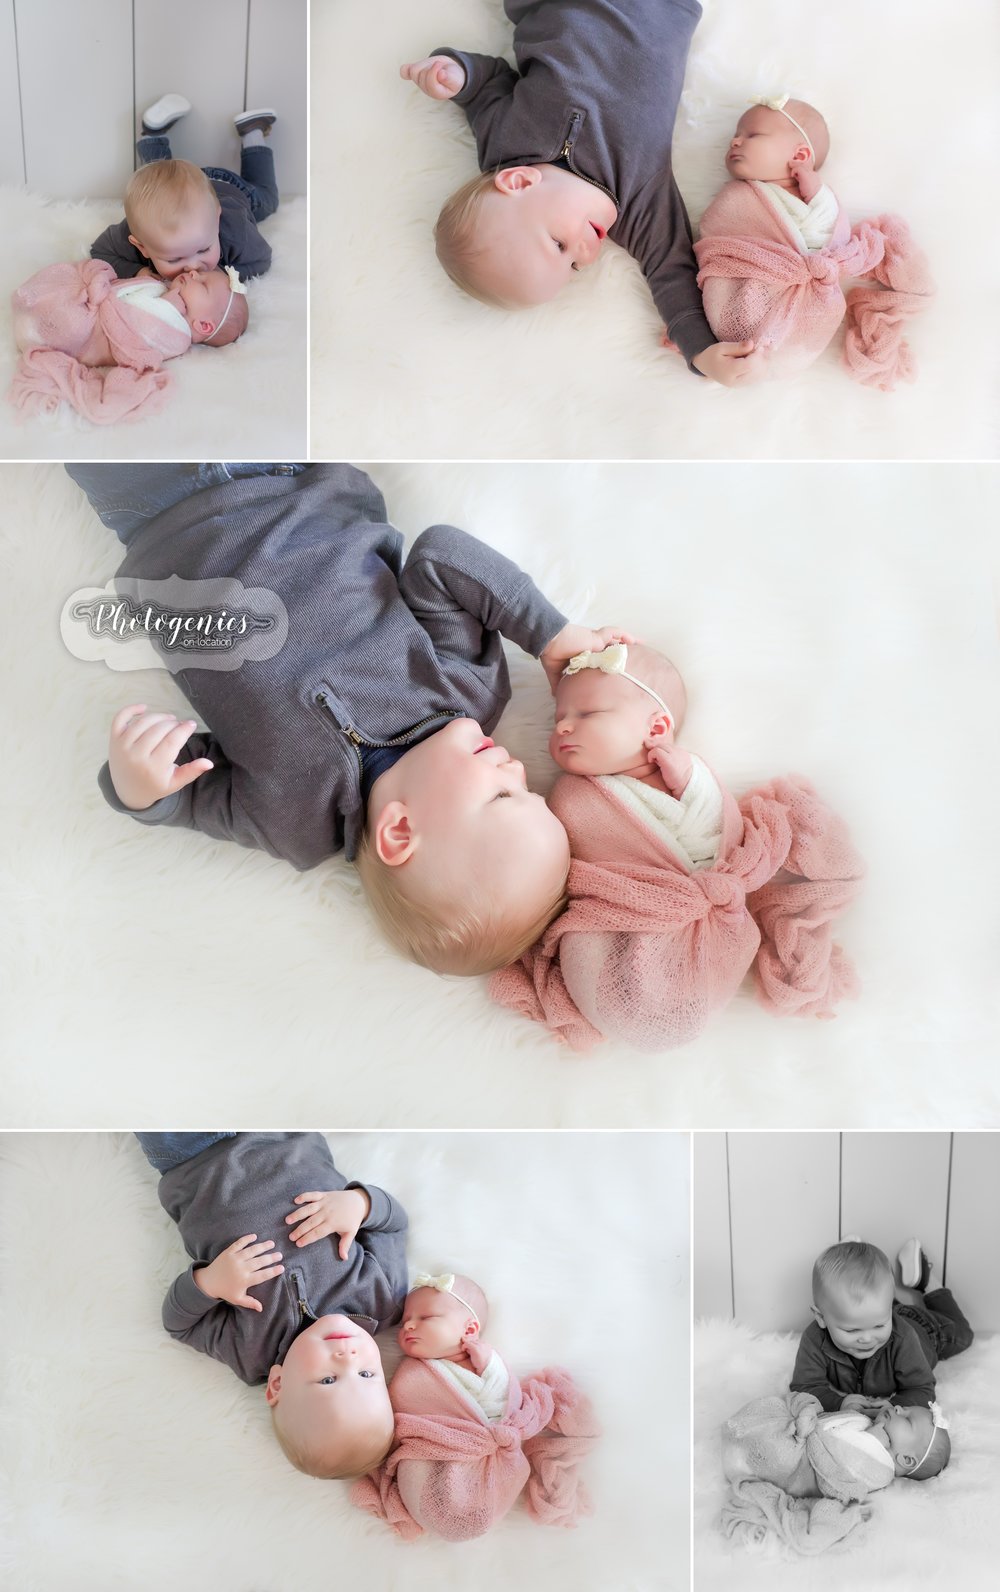  newborn_girl_sibling_photography_family_poses_ideas_props_studio_color_vibrant_unique_simple_photography 